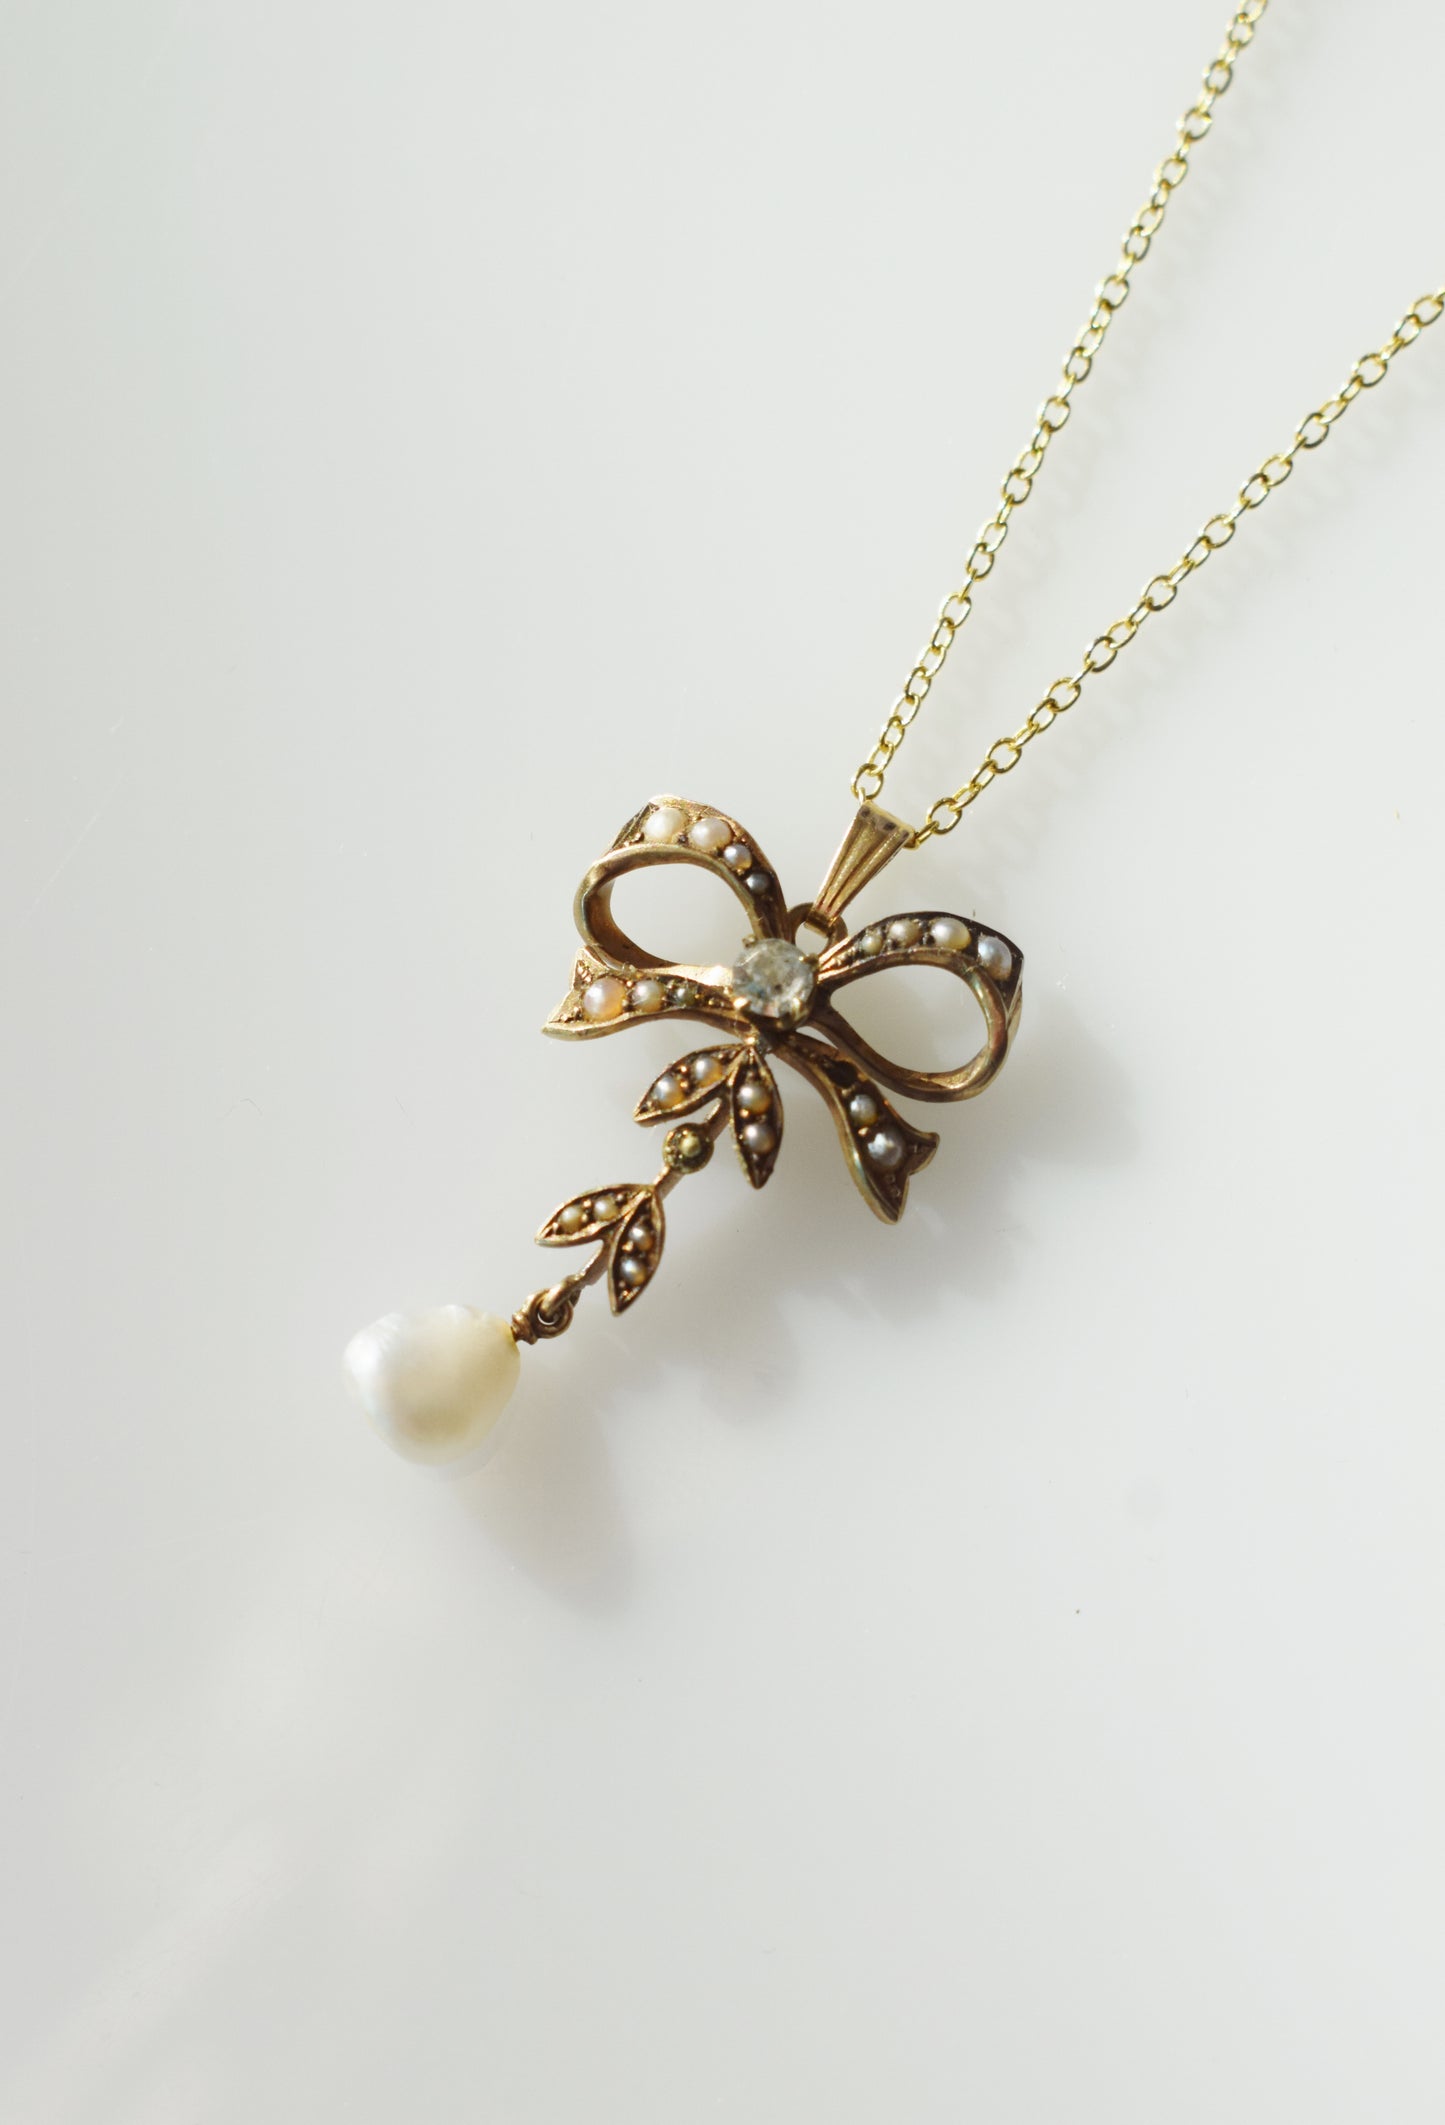 Antique Victorian Gold and Pearl Bow Pendant